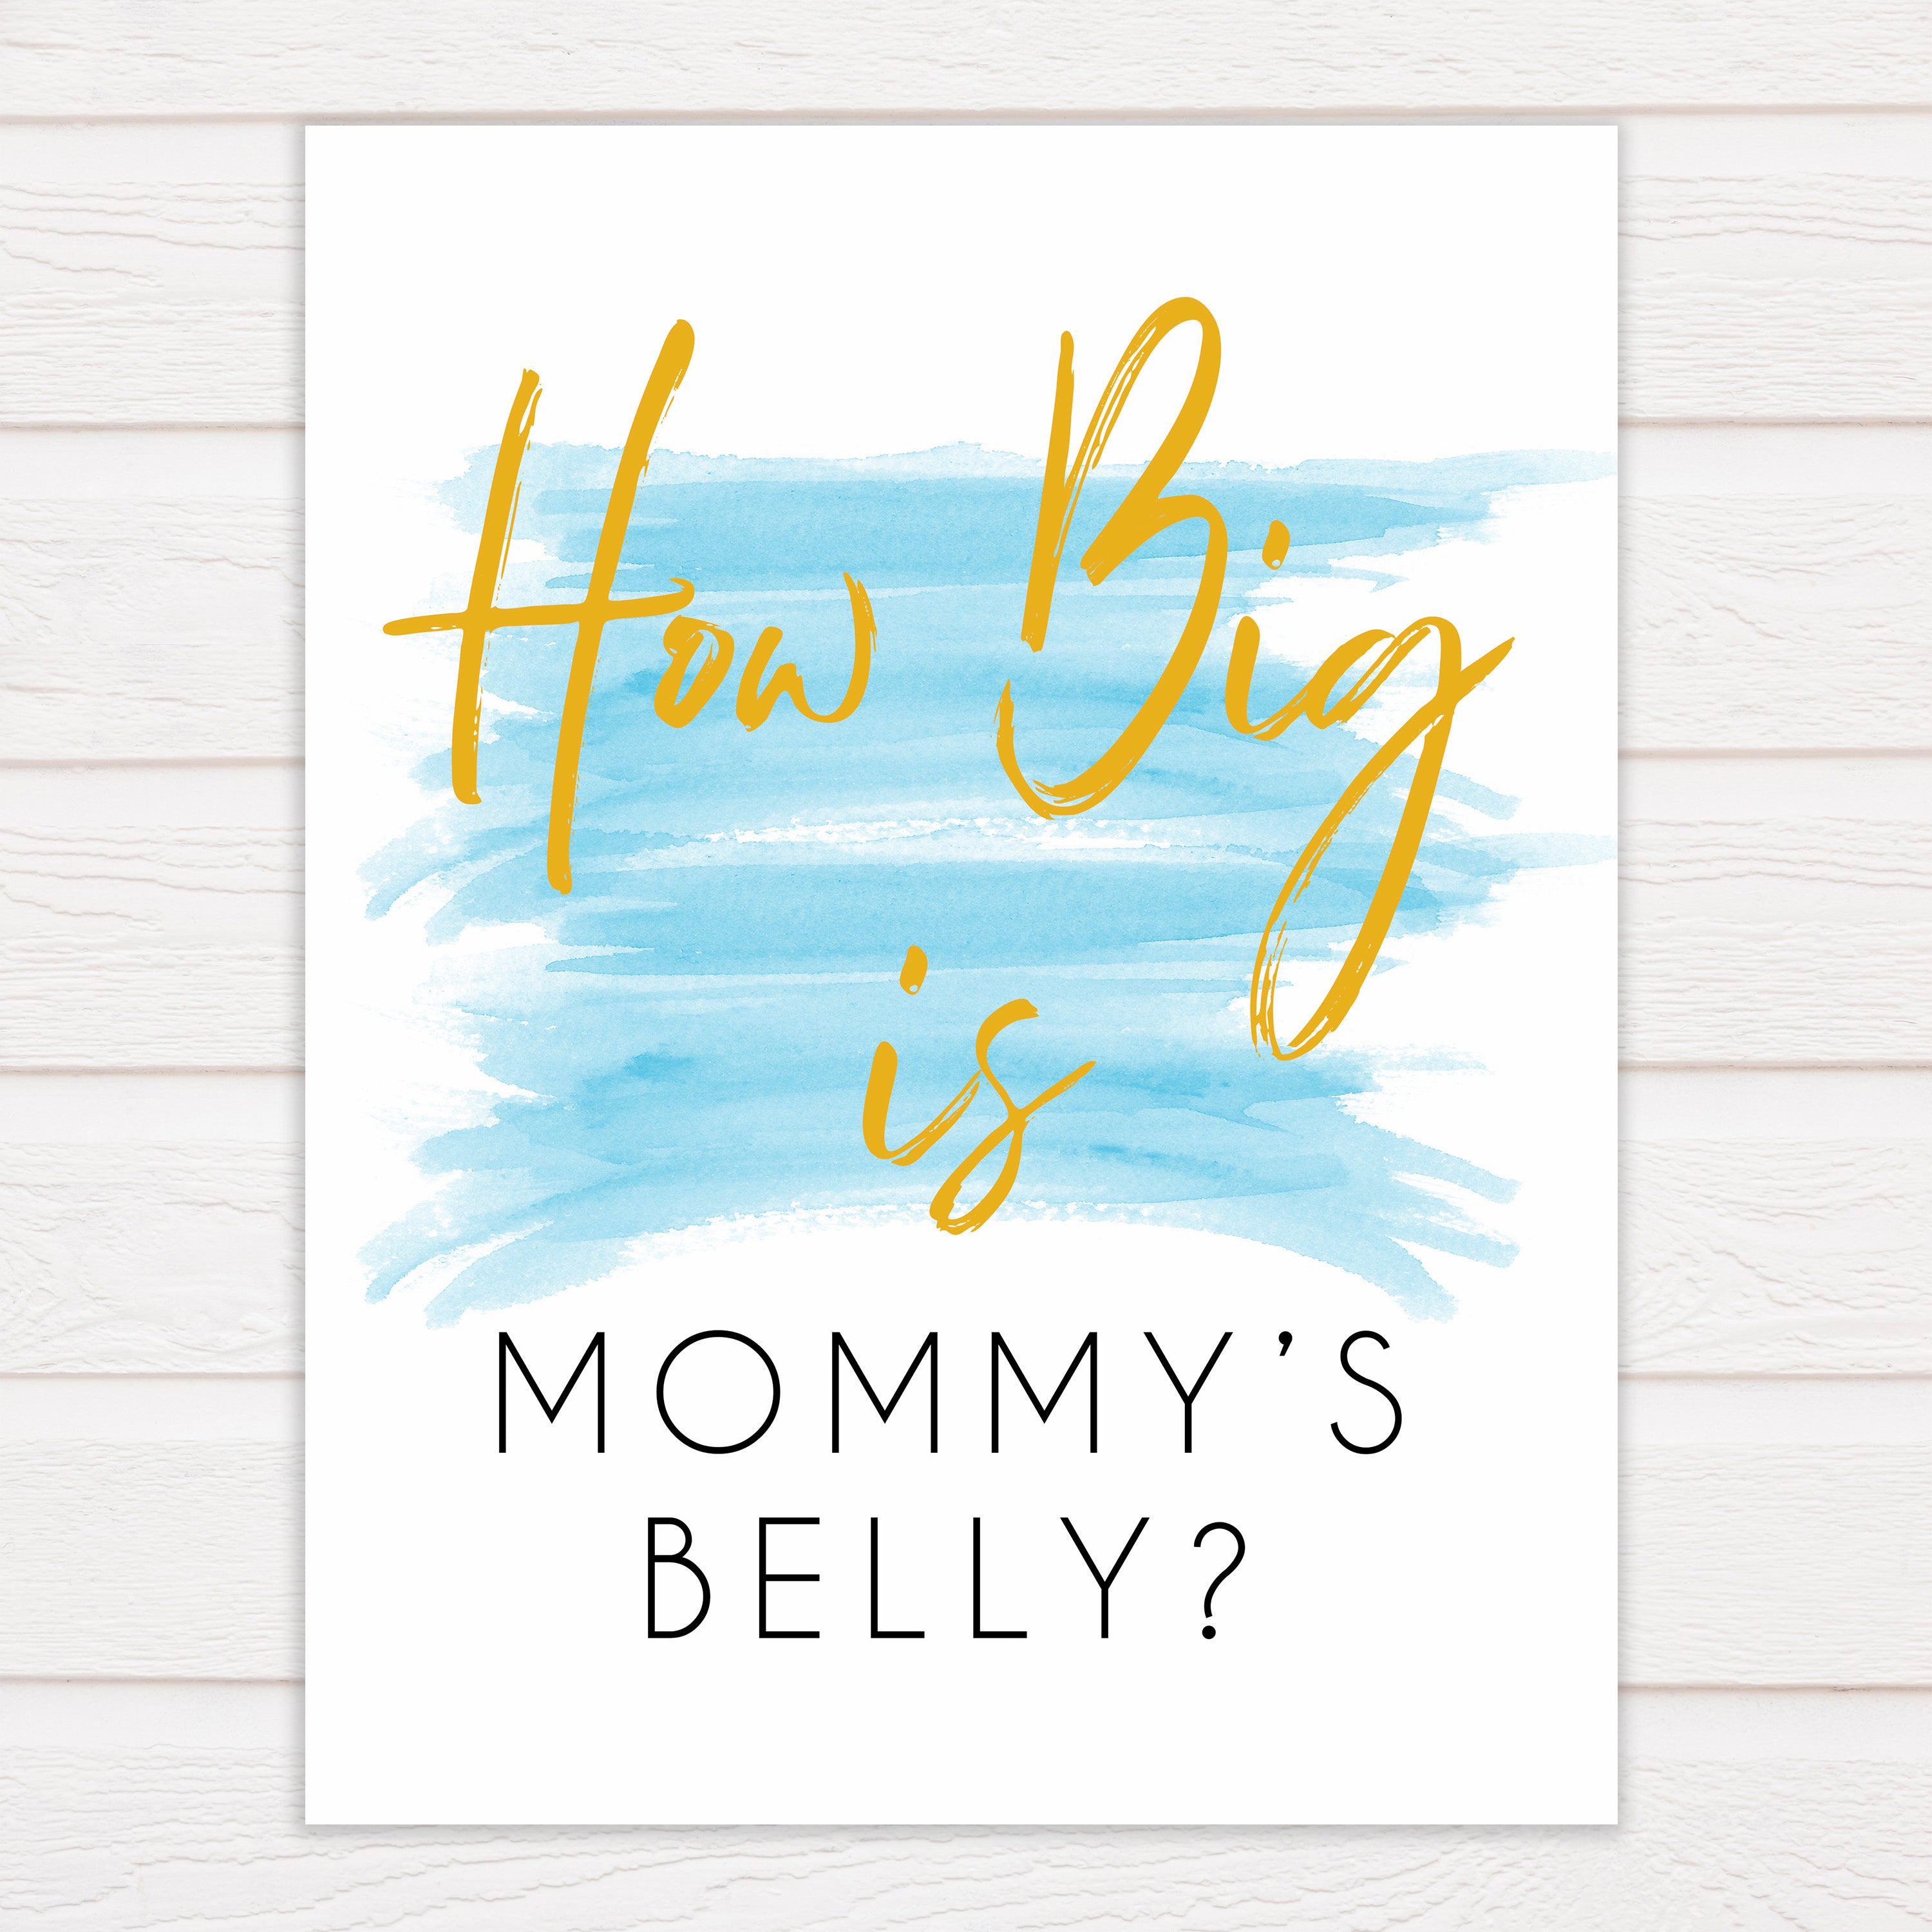 Blue swash, how big is mommys belly baby games, baby shower games, printable baby games, fun baby games, boy baby shower games, baby games, fun baby shower ideas, baby shower ideas, boy baby games, blue baby shower